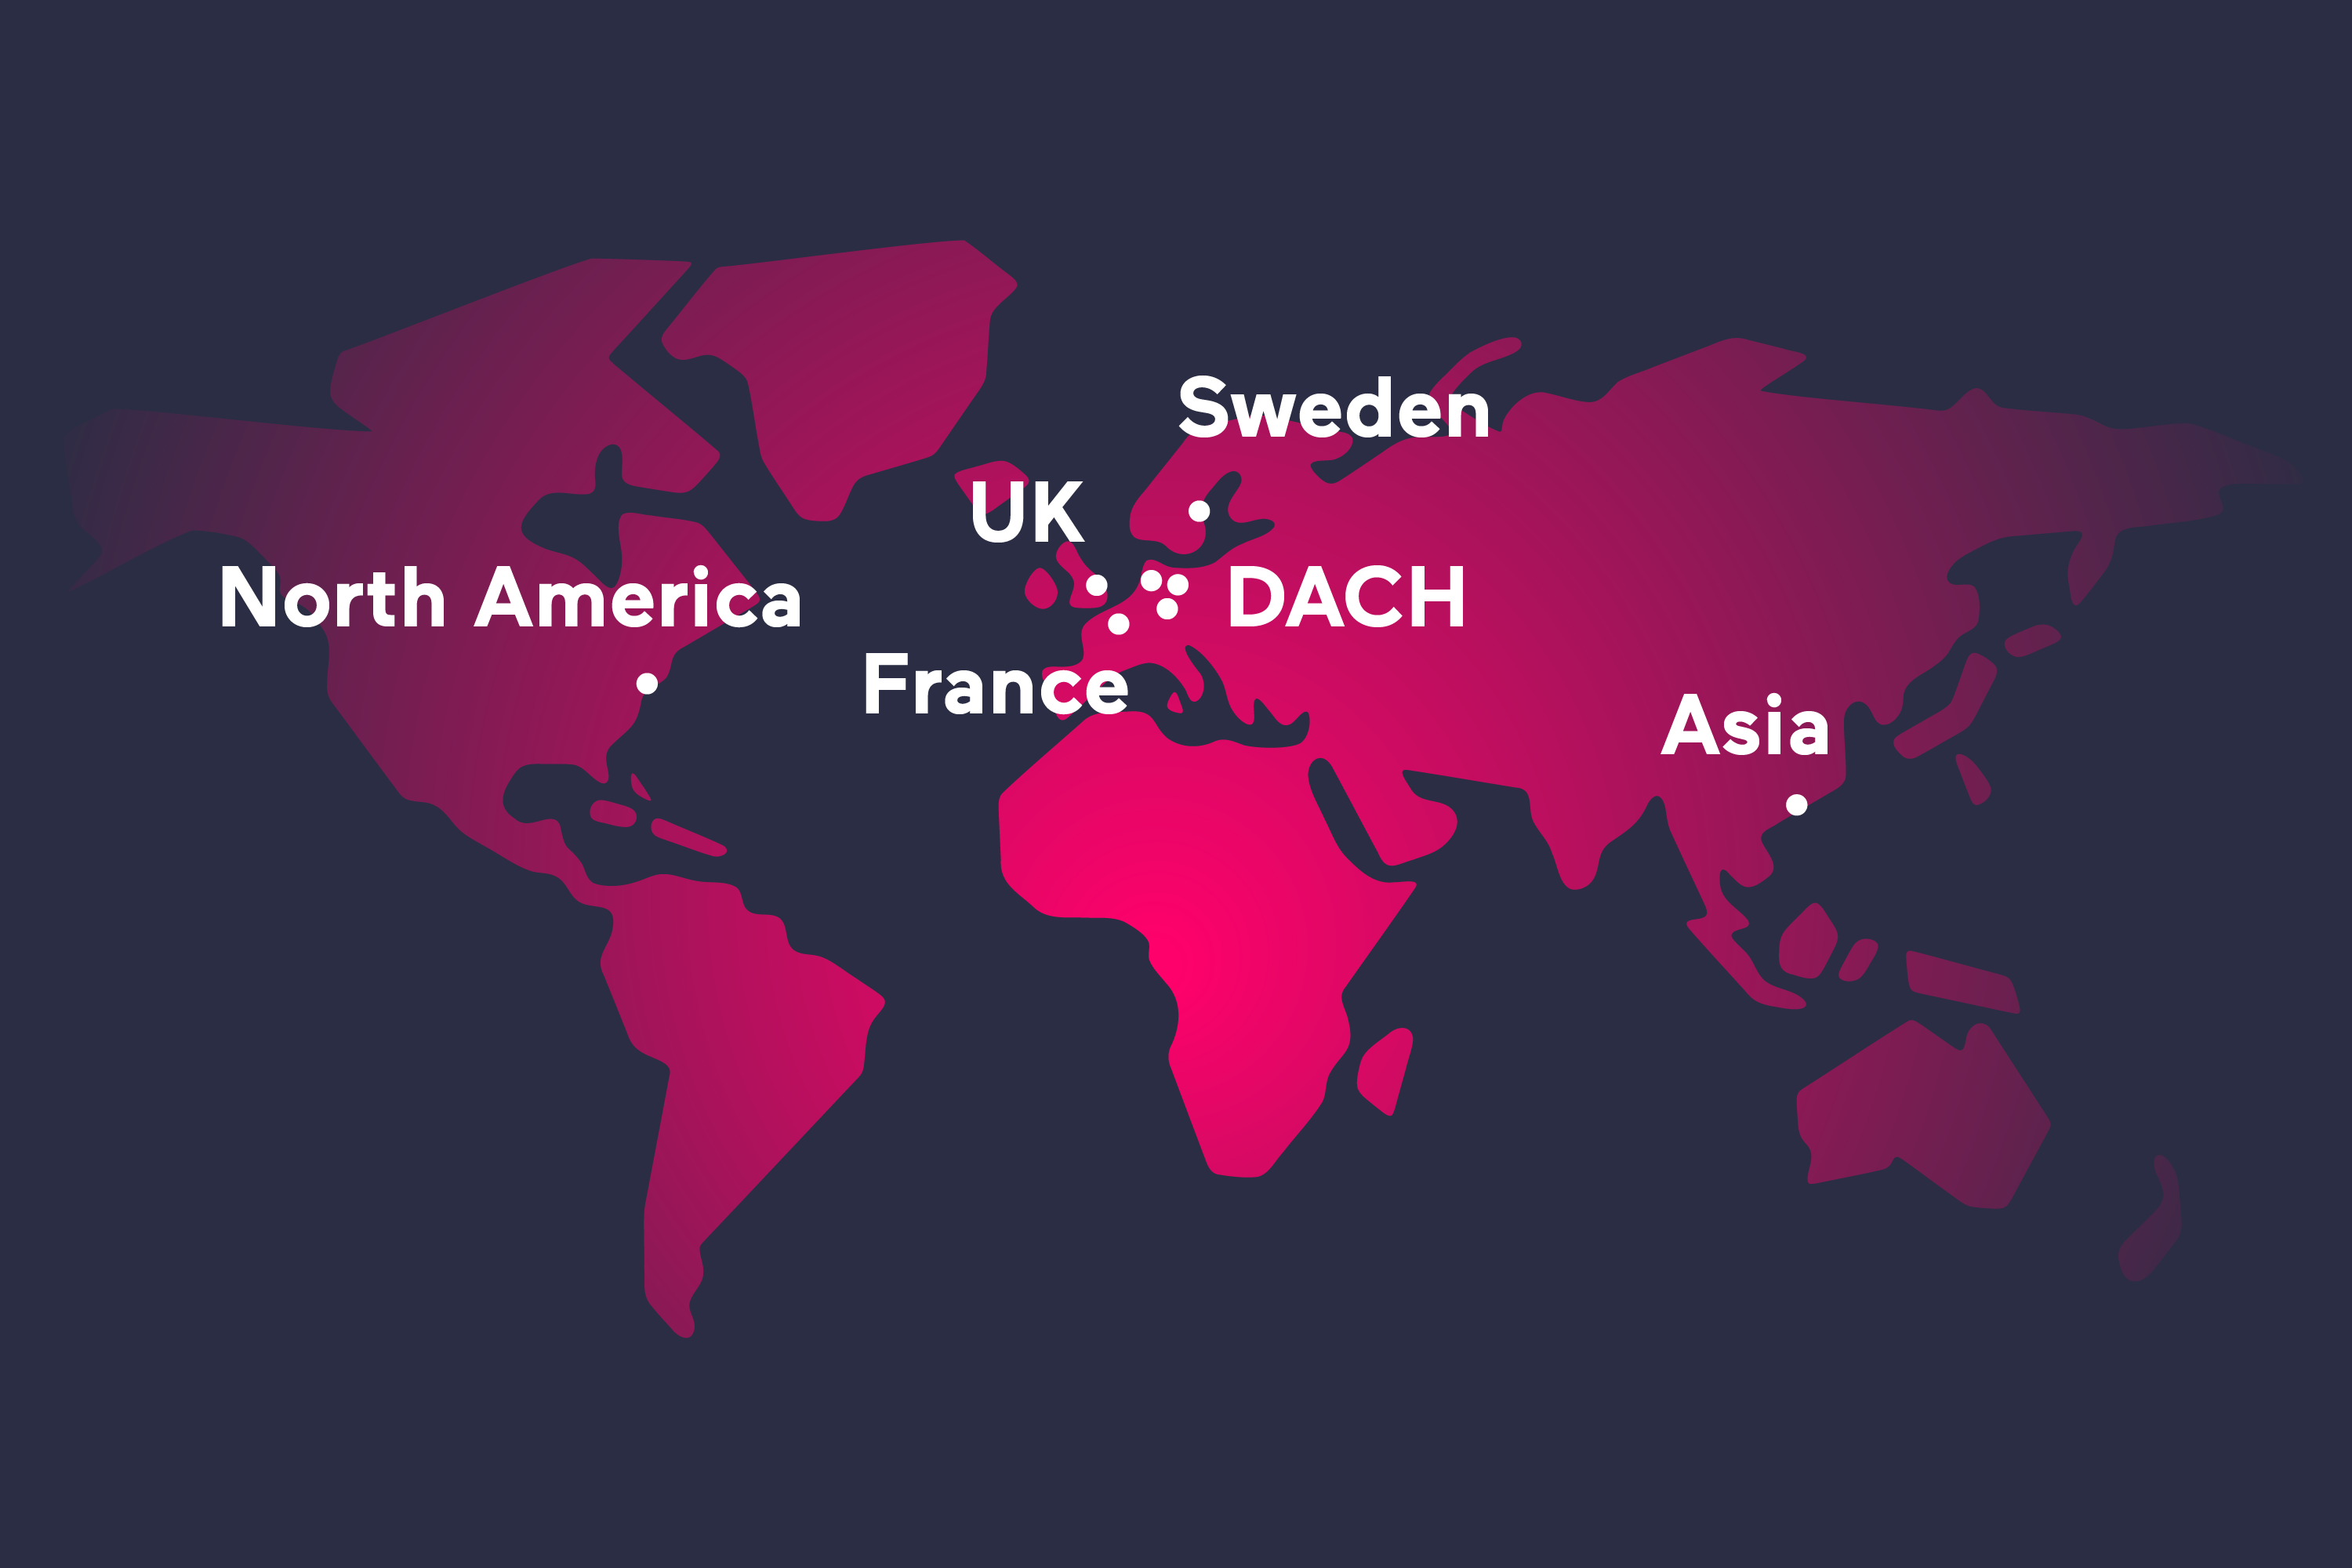 Locations in DACH, UK, France, Sweden, North America, Asia